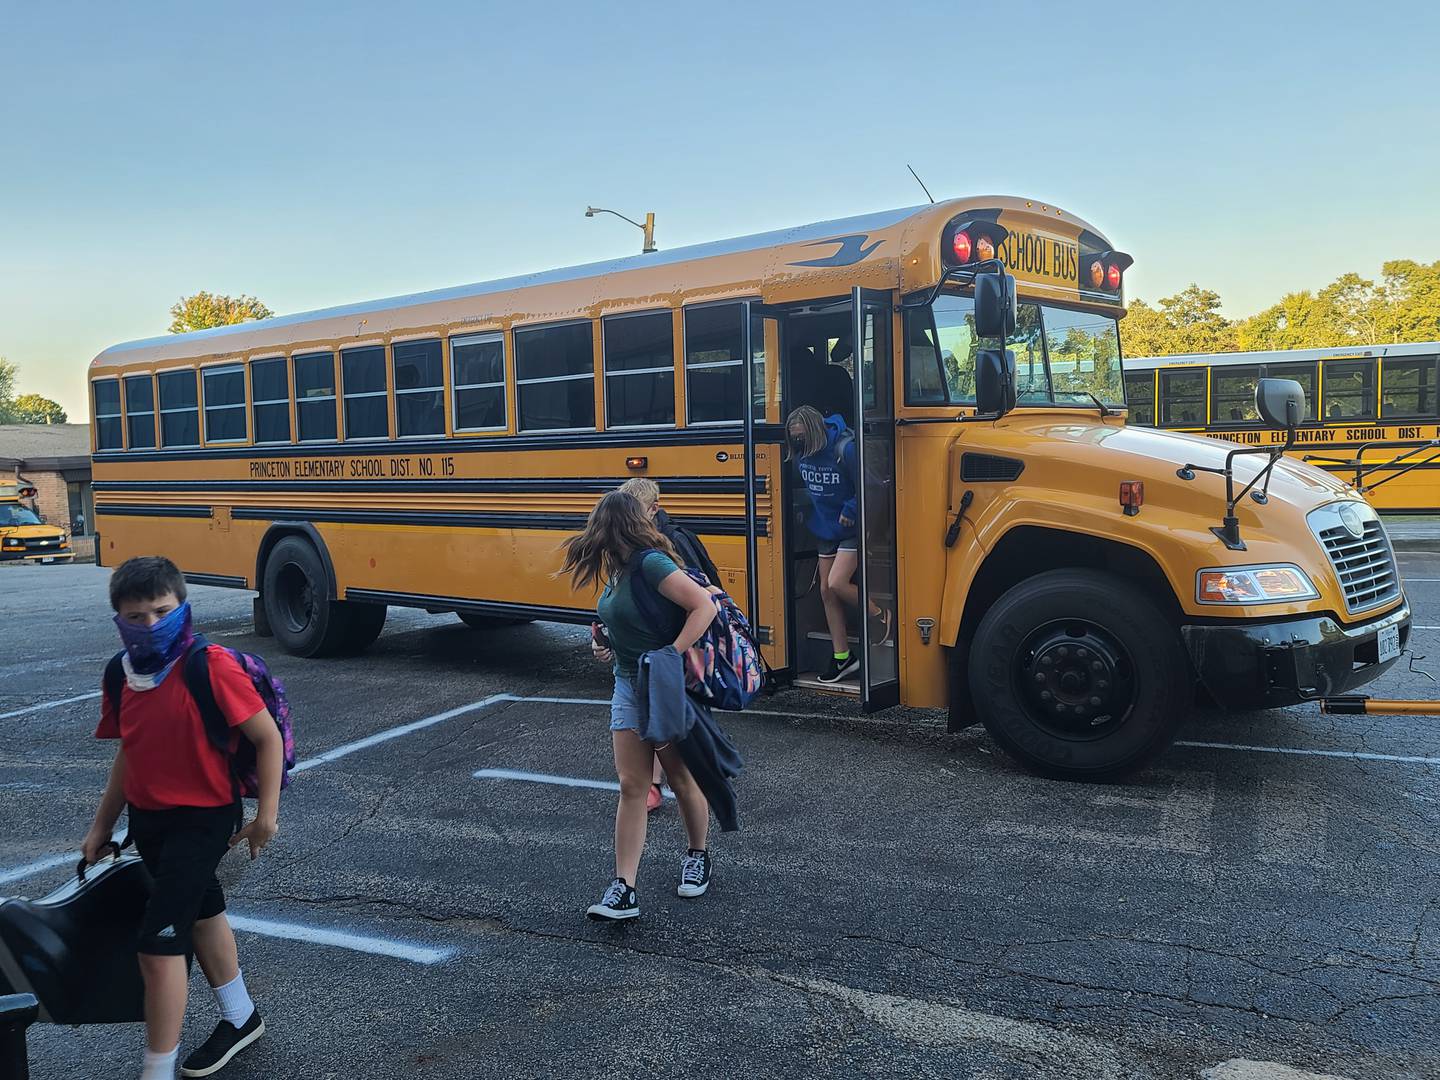 Princeton Elementary students accustomed to twice daily shuttles may be forced to find other options if a driver shortage becomes worse. Nationwide and locally, school districts are feeling the pinch as drivers become shorter in supply requiring some creativity in transporting students.